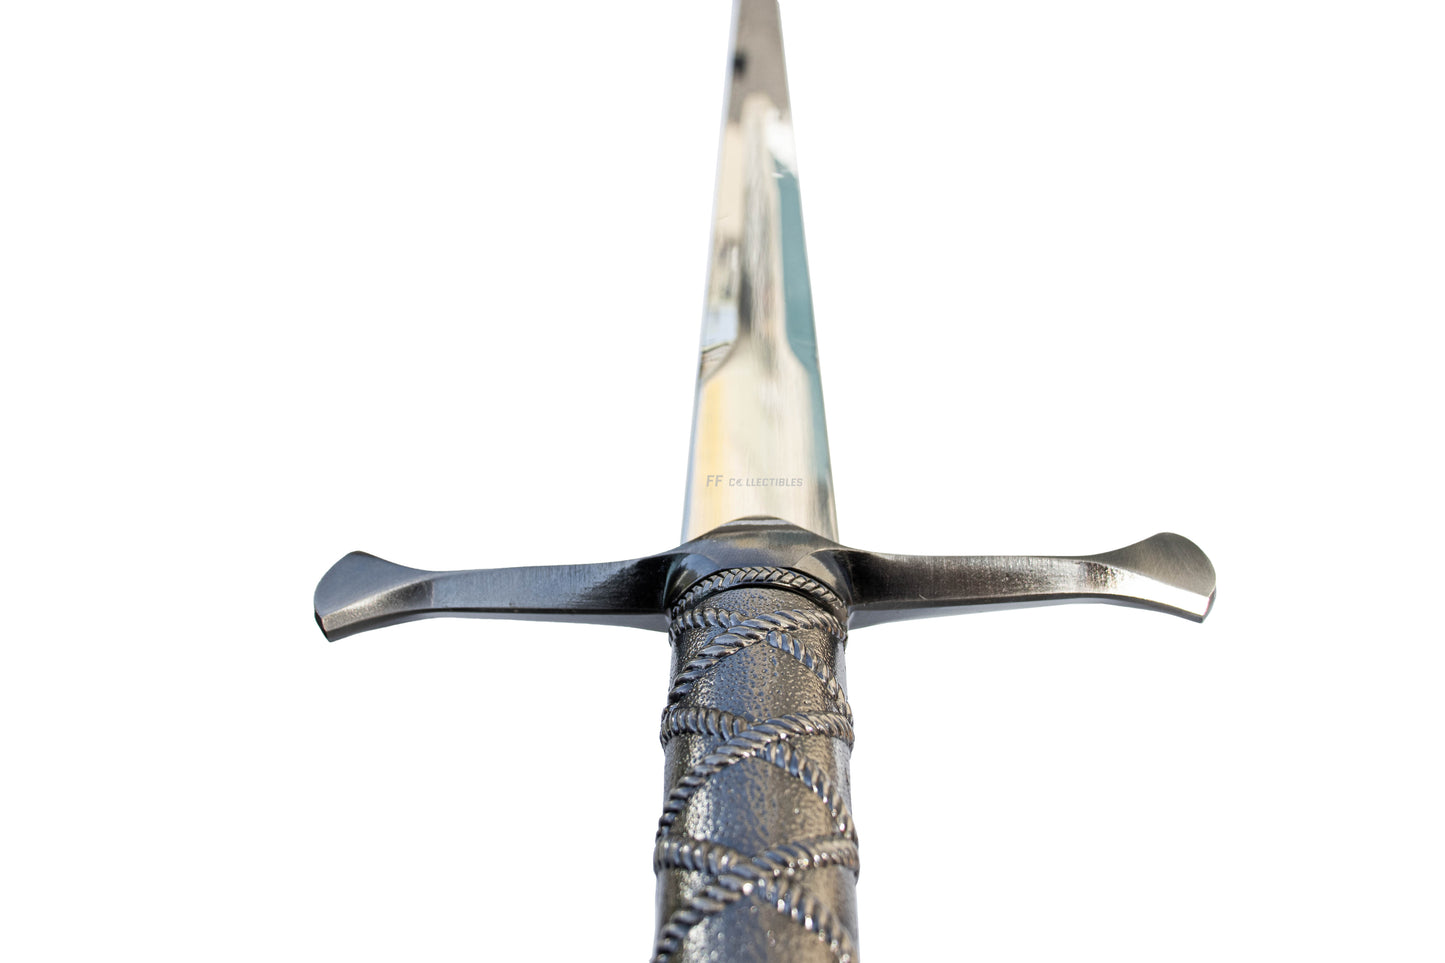 GAME OF THRONES - NEEDLE (BOOK), ARYA STARK'S SWORD (with FREE wall plaque)